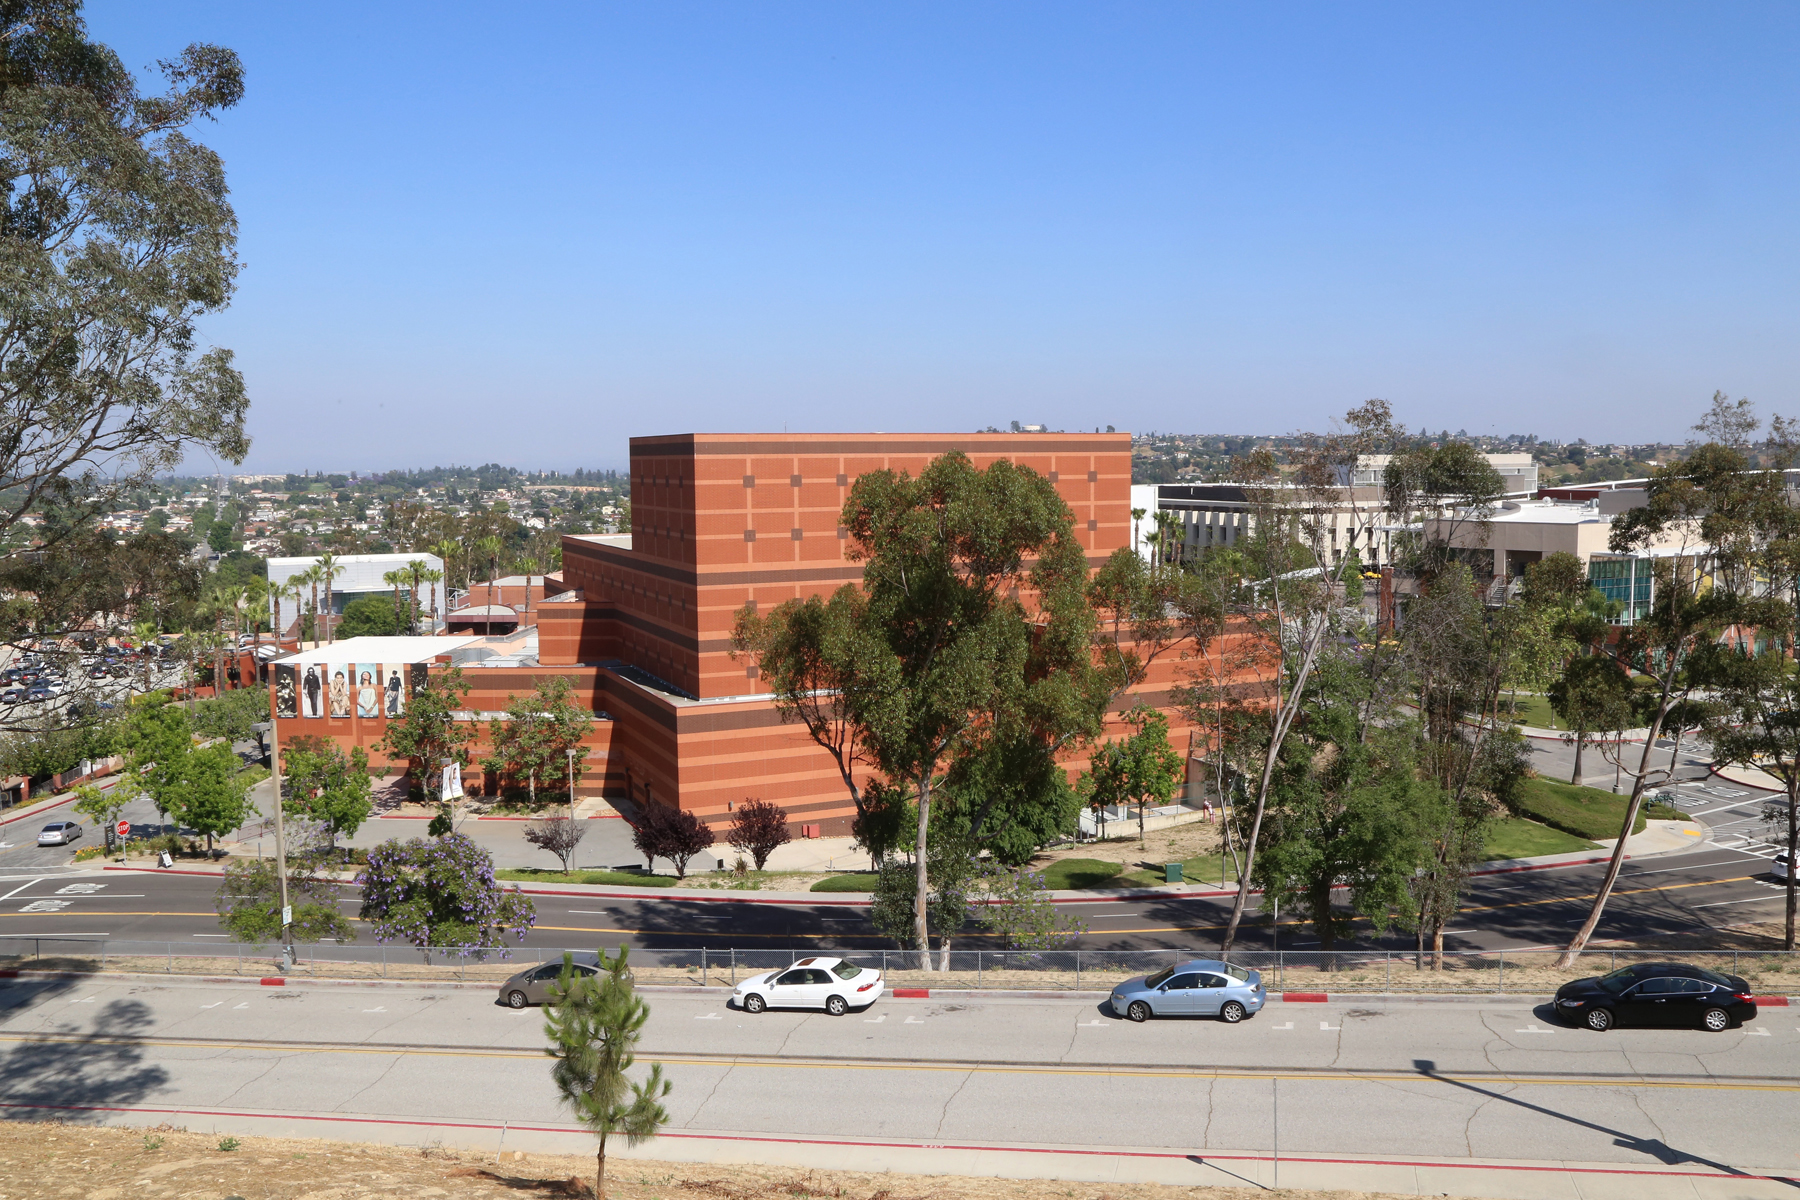 view of cal state la building